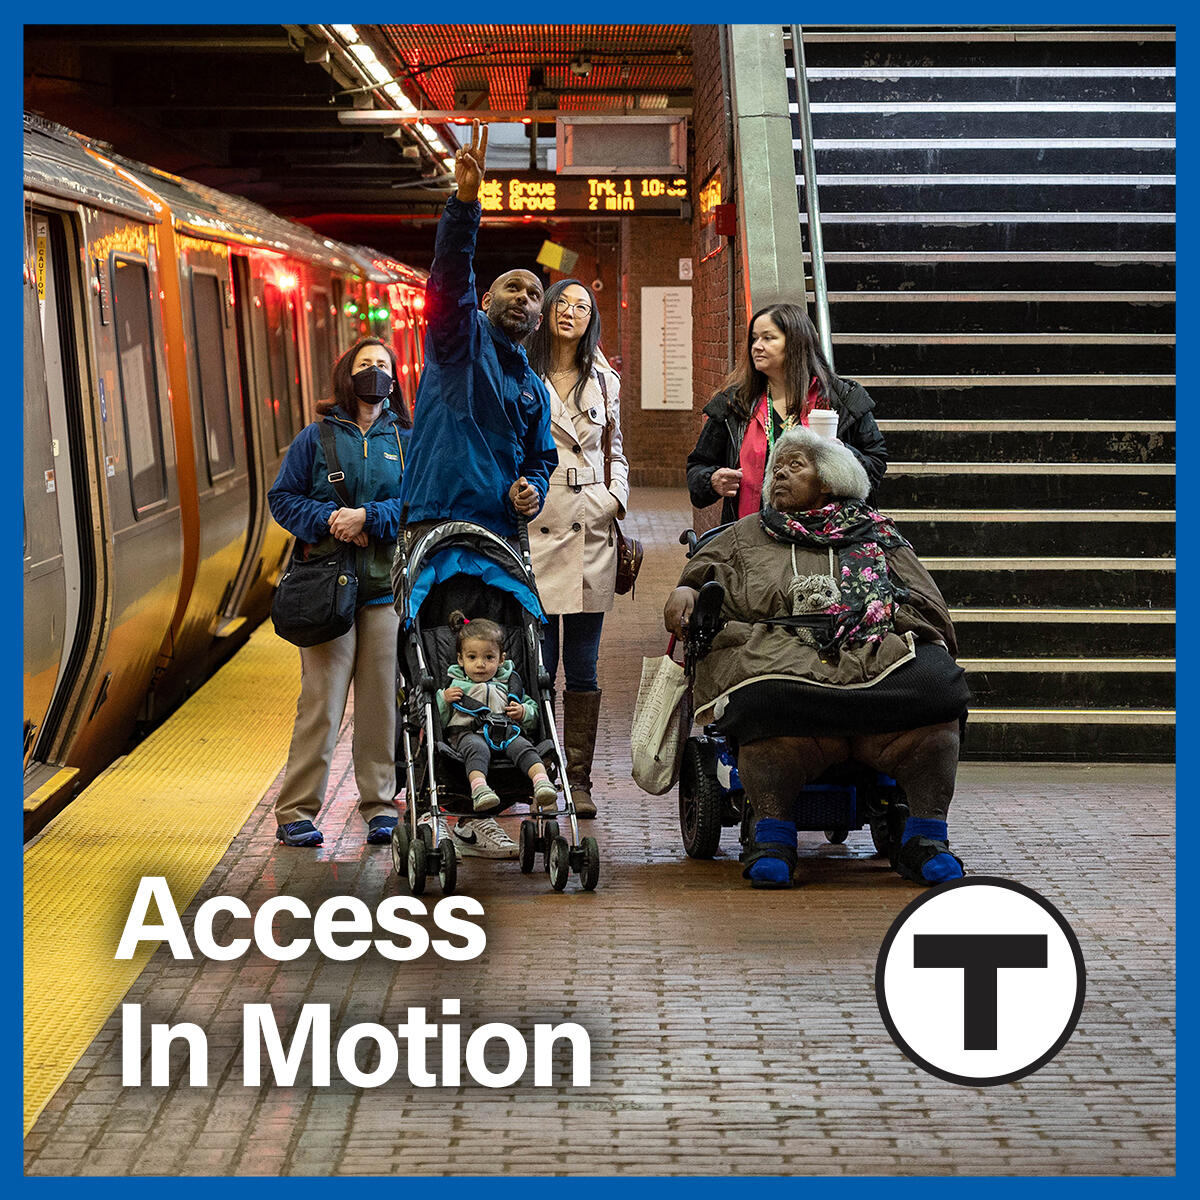 On an Orange Line platform, a group of riders look up at the digital signage as a train idles on the track beside them. The group includes a white woman wearing a mask; an ambulatory Asian American woman; a South Asian man pushing a stroller; an African American woman using a wheelchair; and a white woman standing behind the African American woman using a wheelchair. The tagline “Access in Motion” and the T logo appear in the foreground.